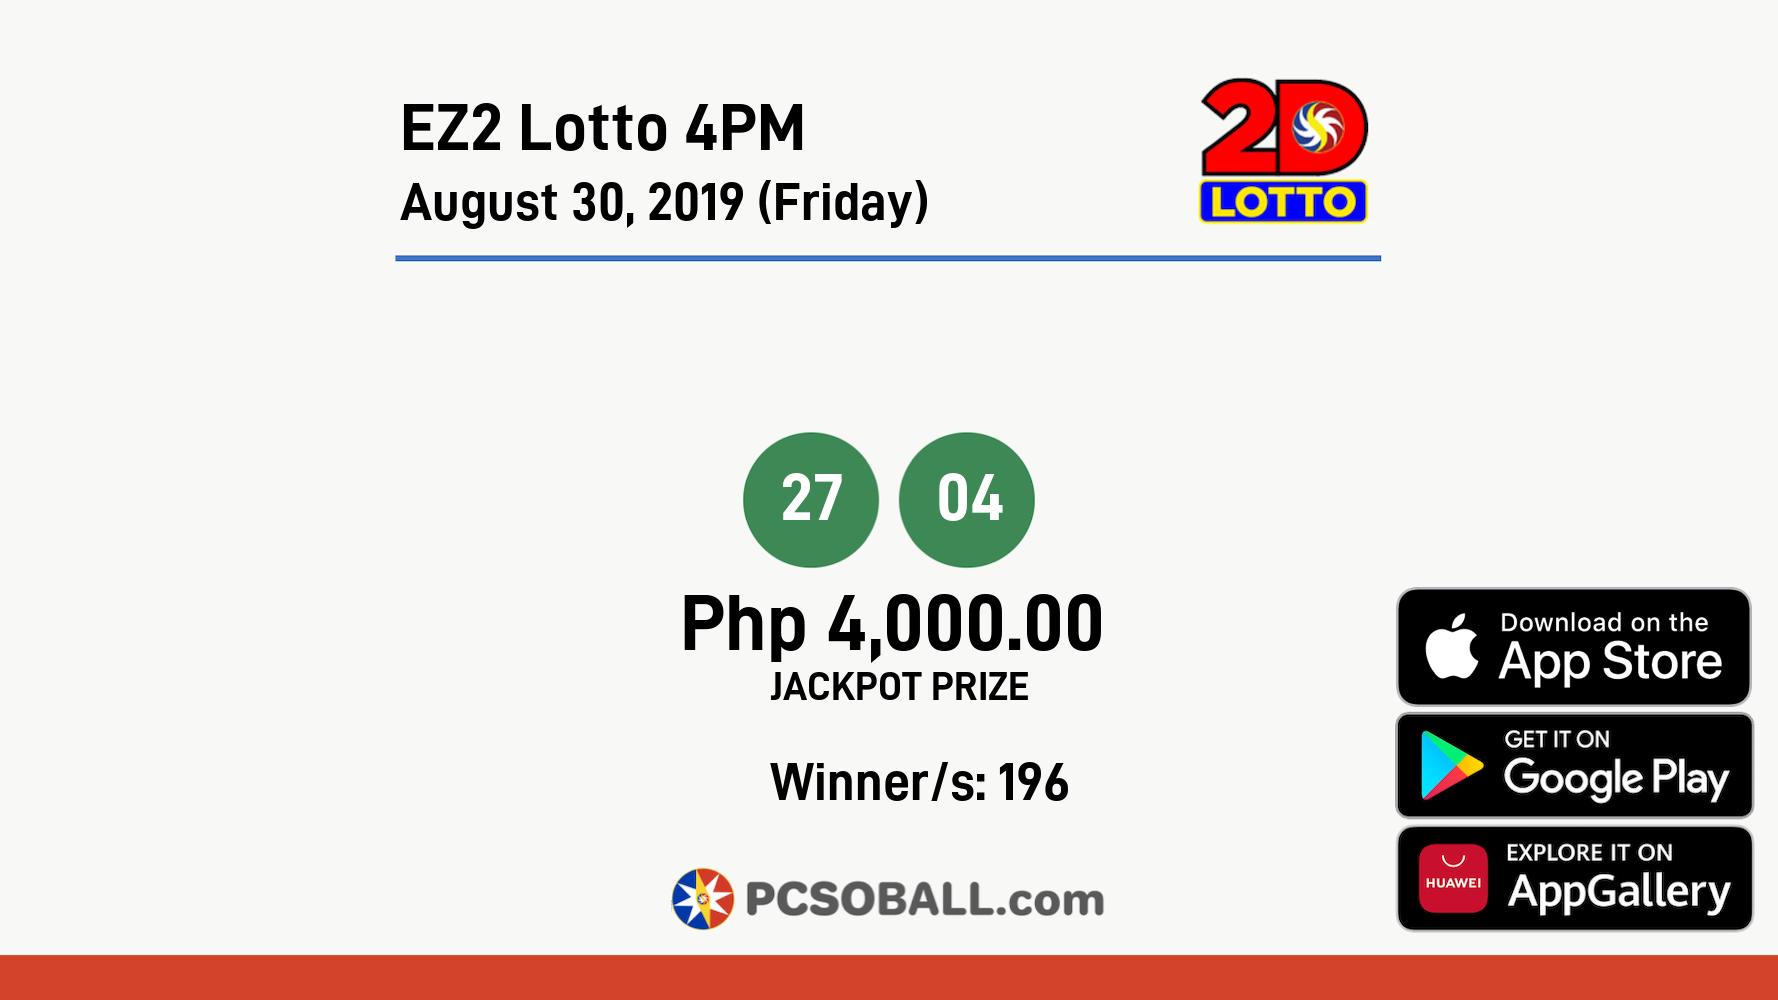 EZ2 Lotto 4PM August 30, 2019 (Friday) Result